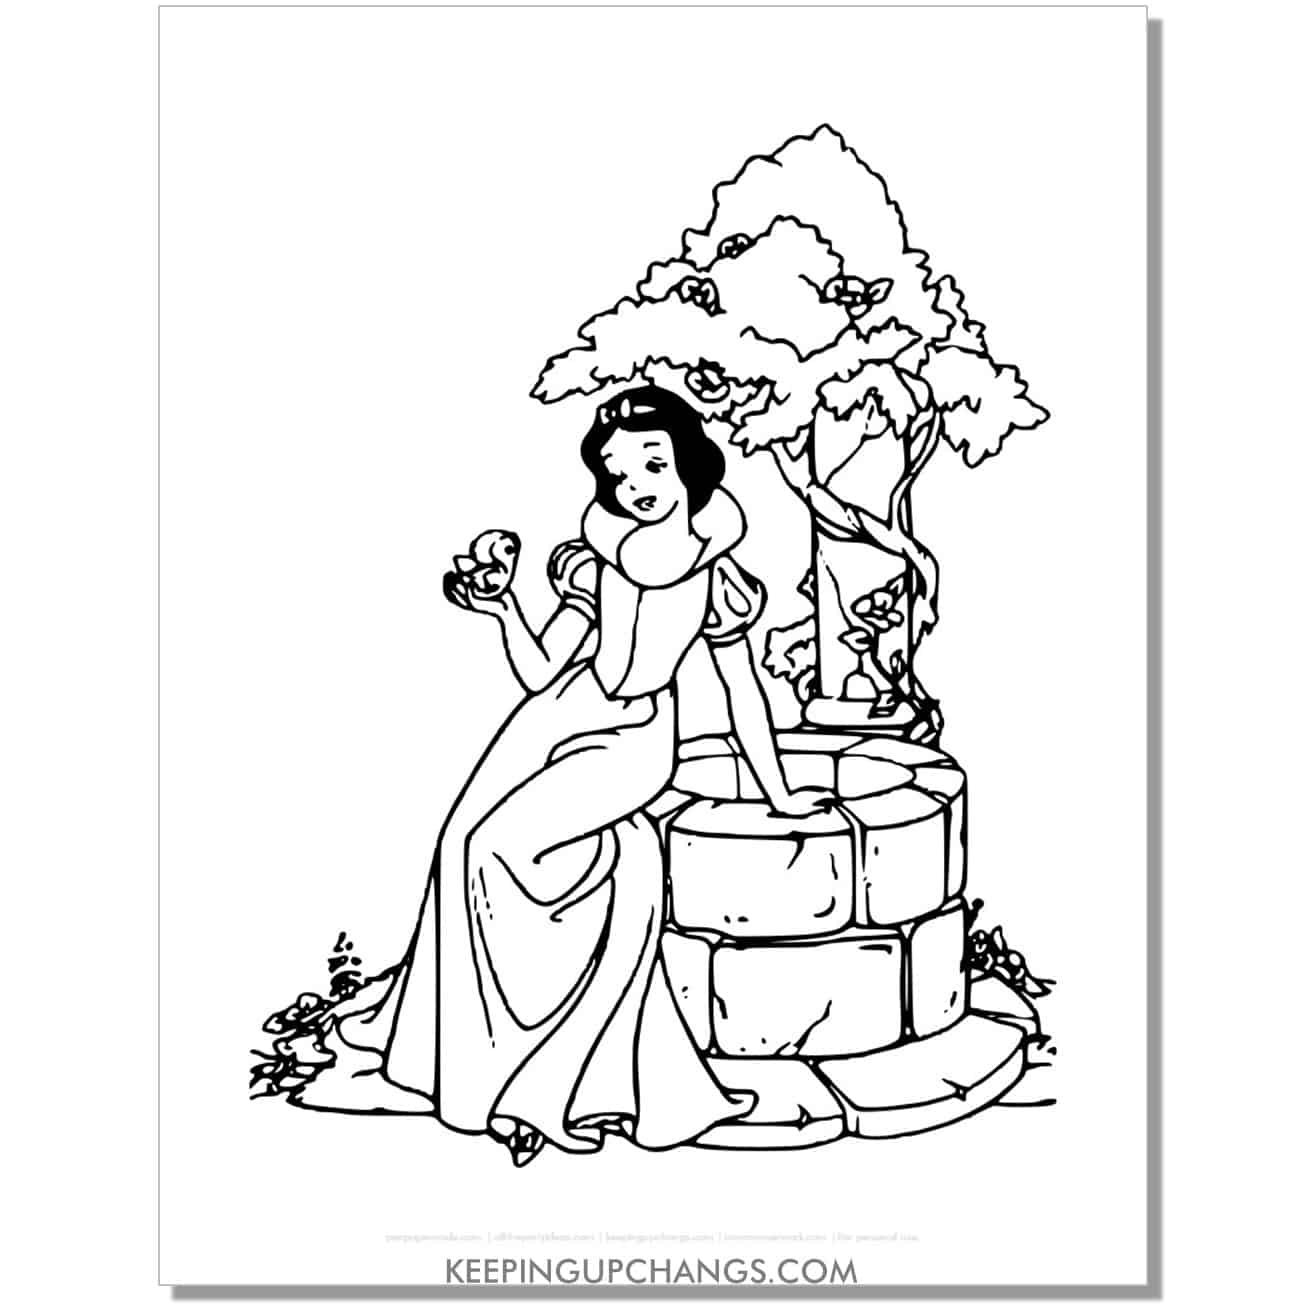 snow white near well coloring page, sheet.